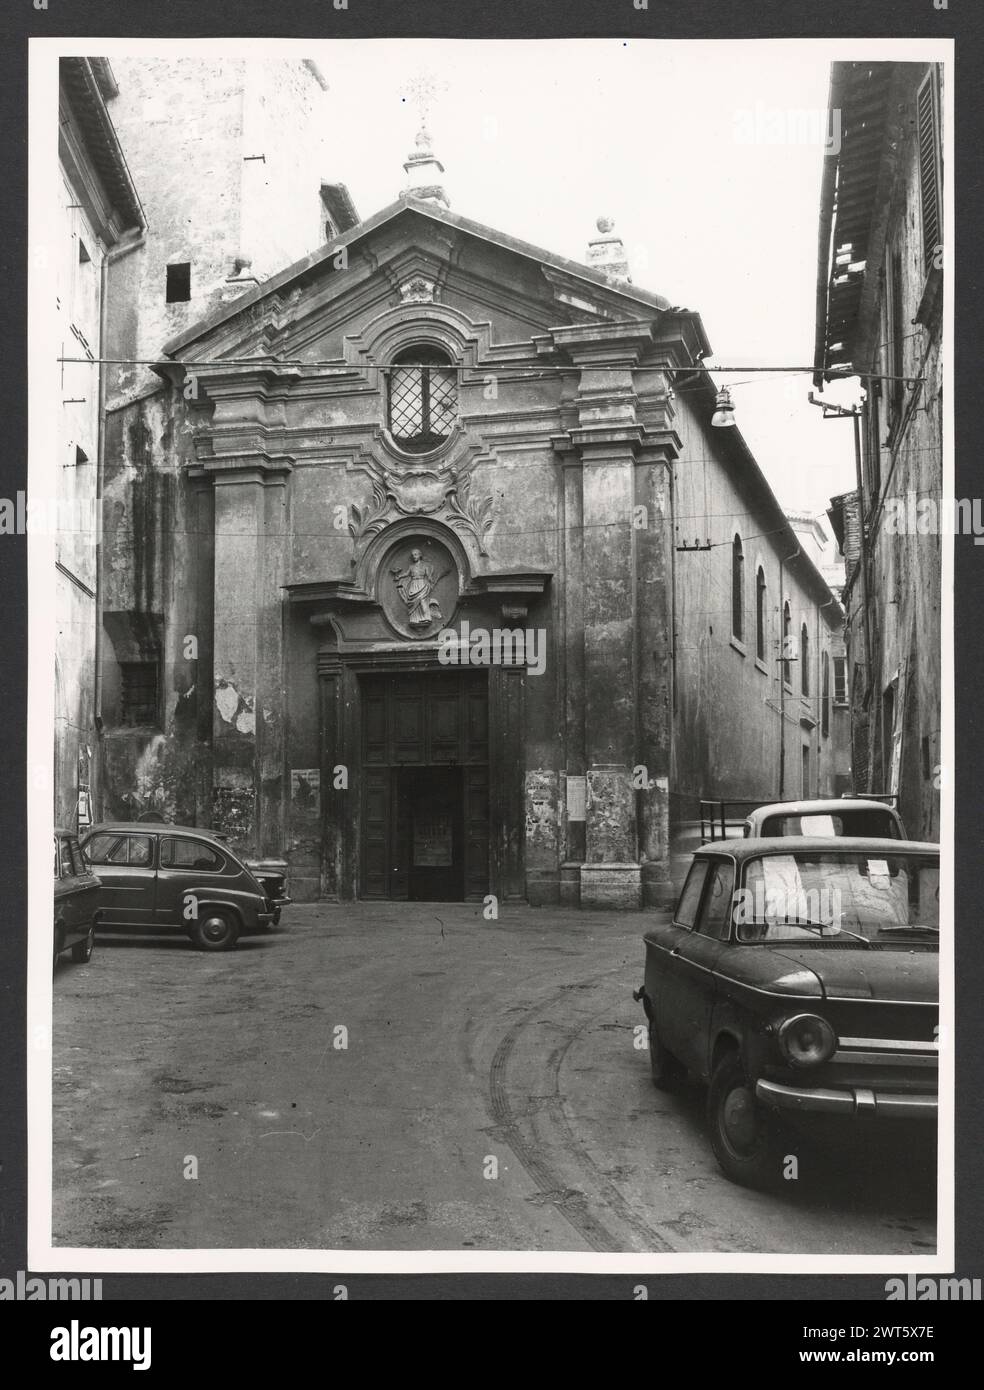 Lazio Rieti Rieti S. Lucia. Hutzel, Max 1960-1990 Post-medieval: Architecture, sculpture, wooden ceilings with inlay and fresco decoration, carved tabernacle with relief on door, painting. Baroque structure. German-born photographer and scholar Max Hutzel (1911-1988) photographed in Italy from the early 1960s until his death. The result of this project, referred to by Hutzel as Foto Arte Minore, is thorough documentation of art historical development in Italy up to the 18th century, including objects of the Etruscans and the Romans, as well as early Medieval, Romanesque, Gothic, Renaissance an Stock Photo